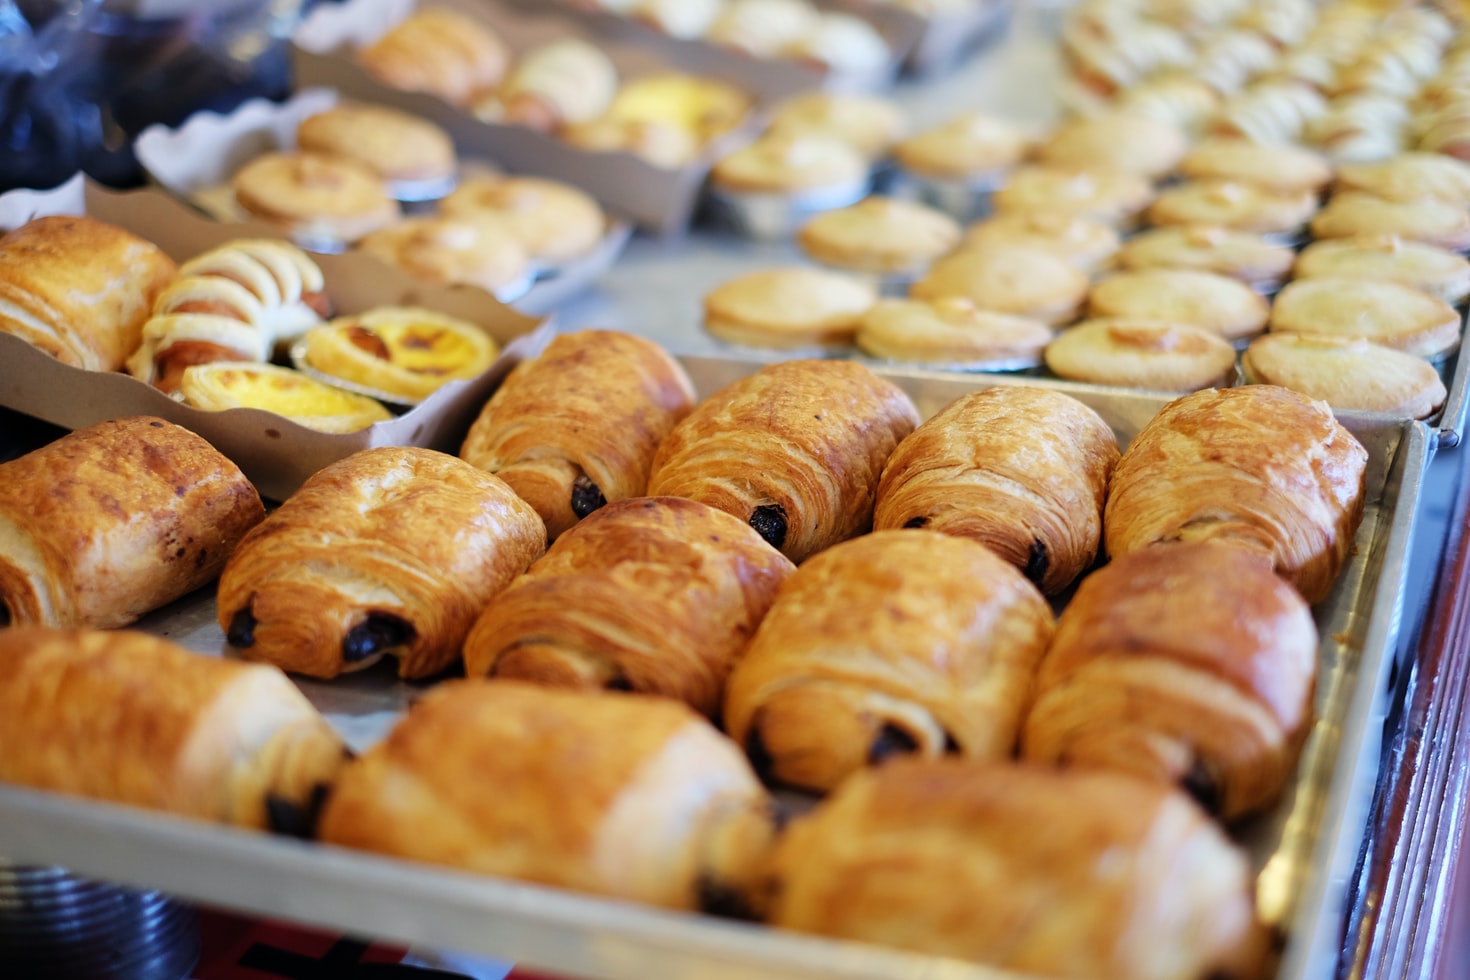 The comprehensive guide to surprising Facts about Bakery Products